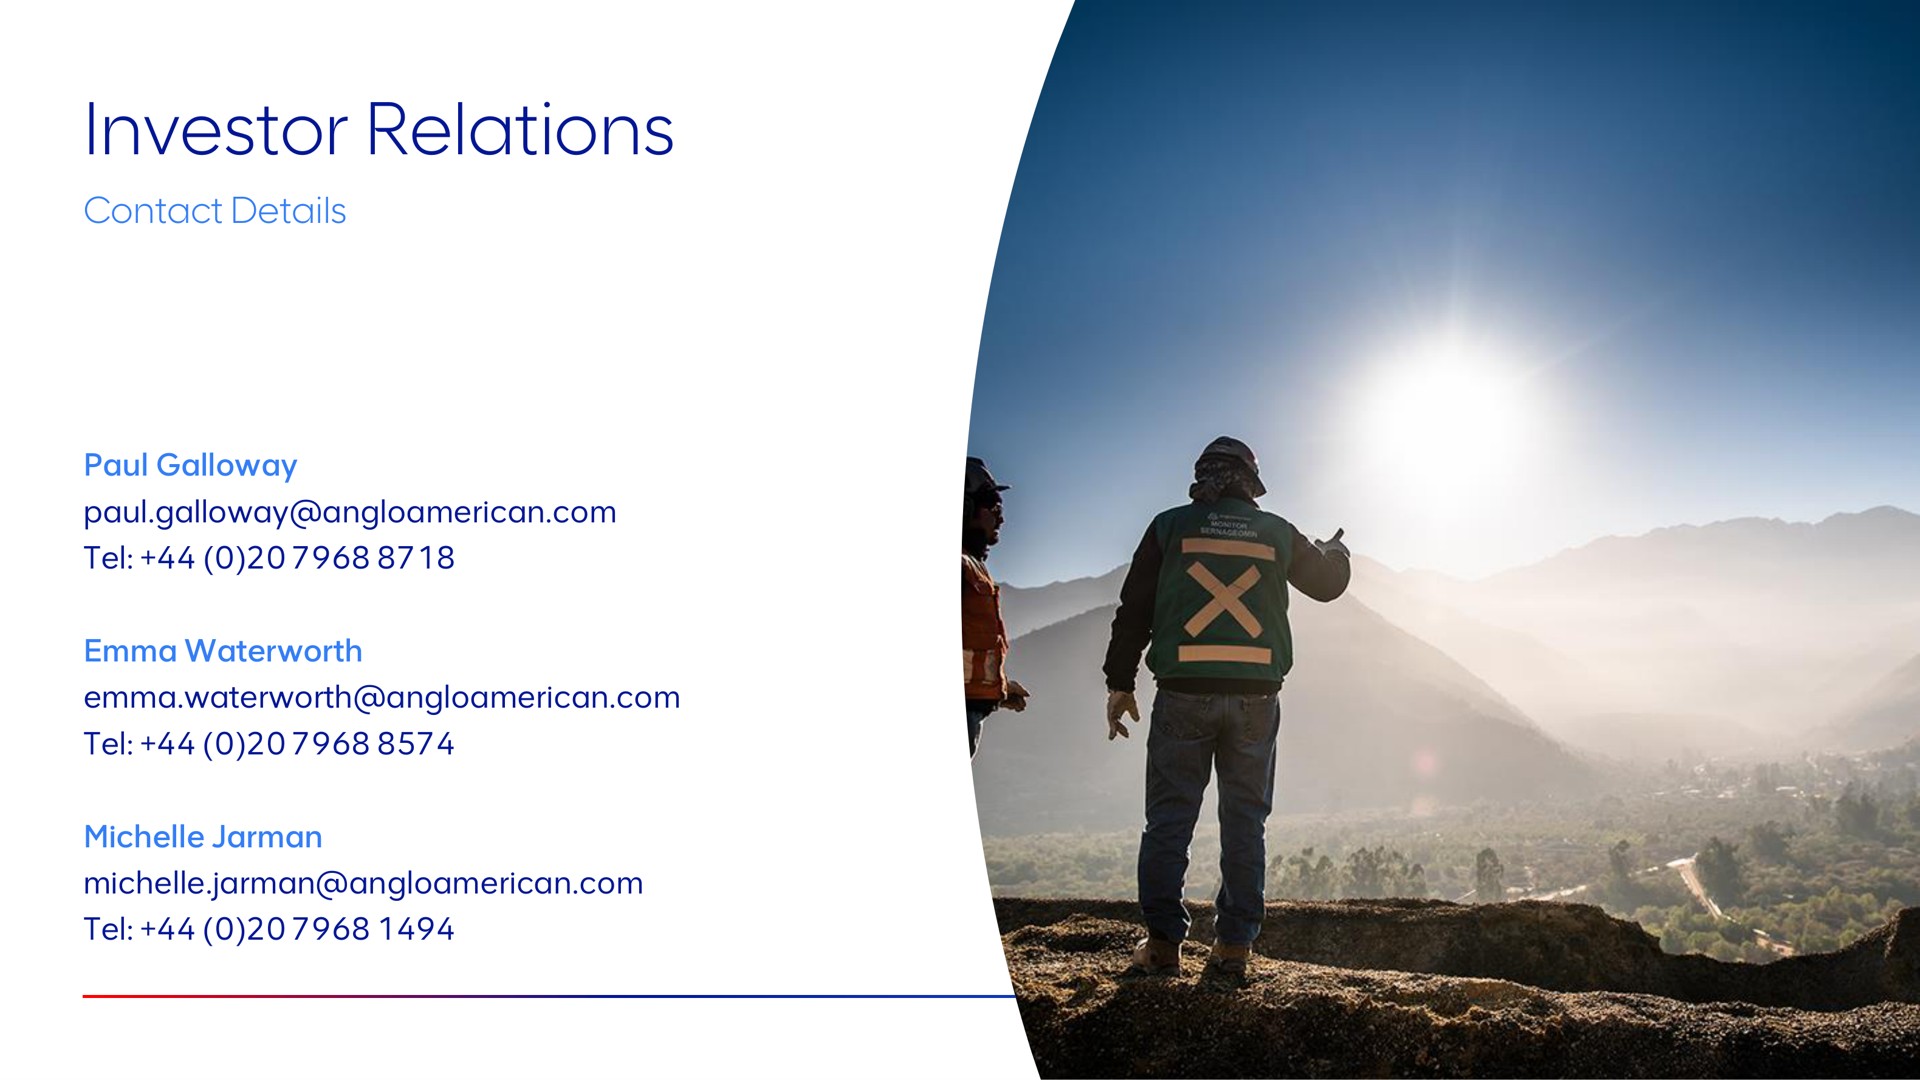 investor relations | AngloAmerican